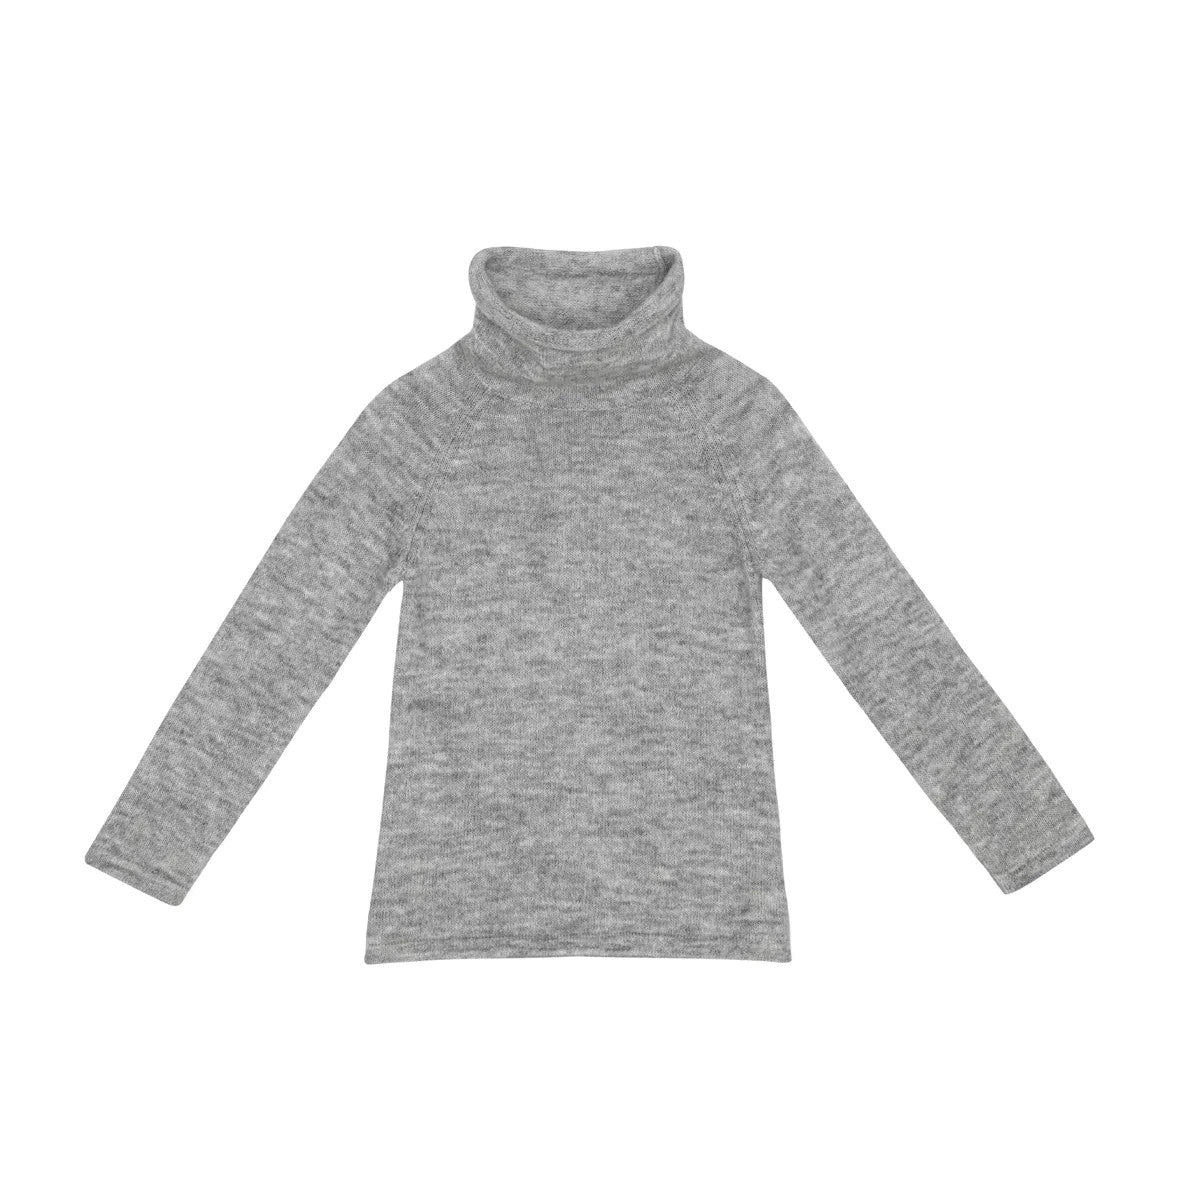 Little Hedonist grey wool-blend turtle neck soft enough to not irritate.